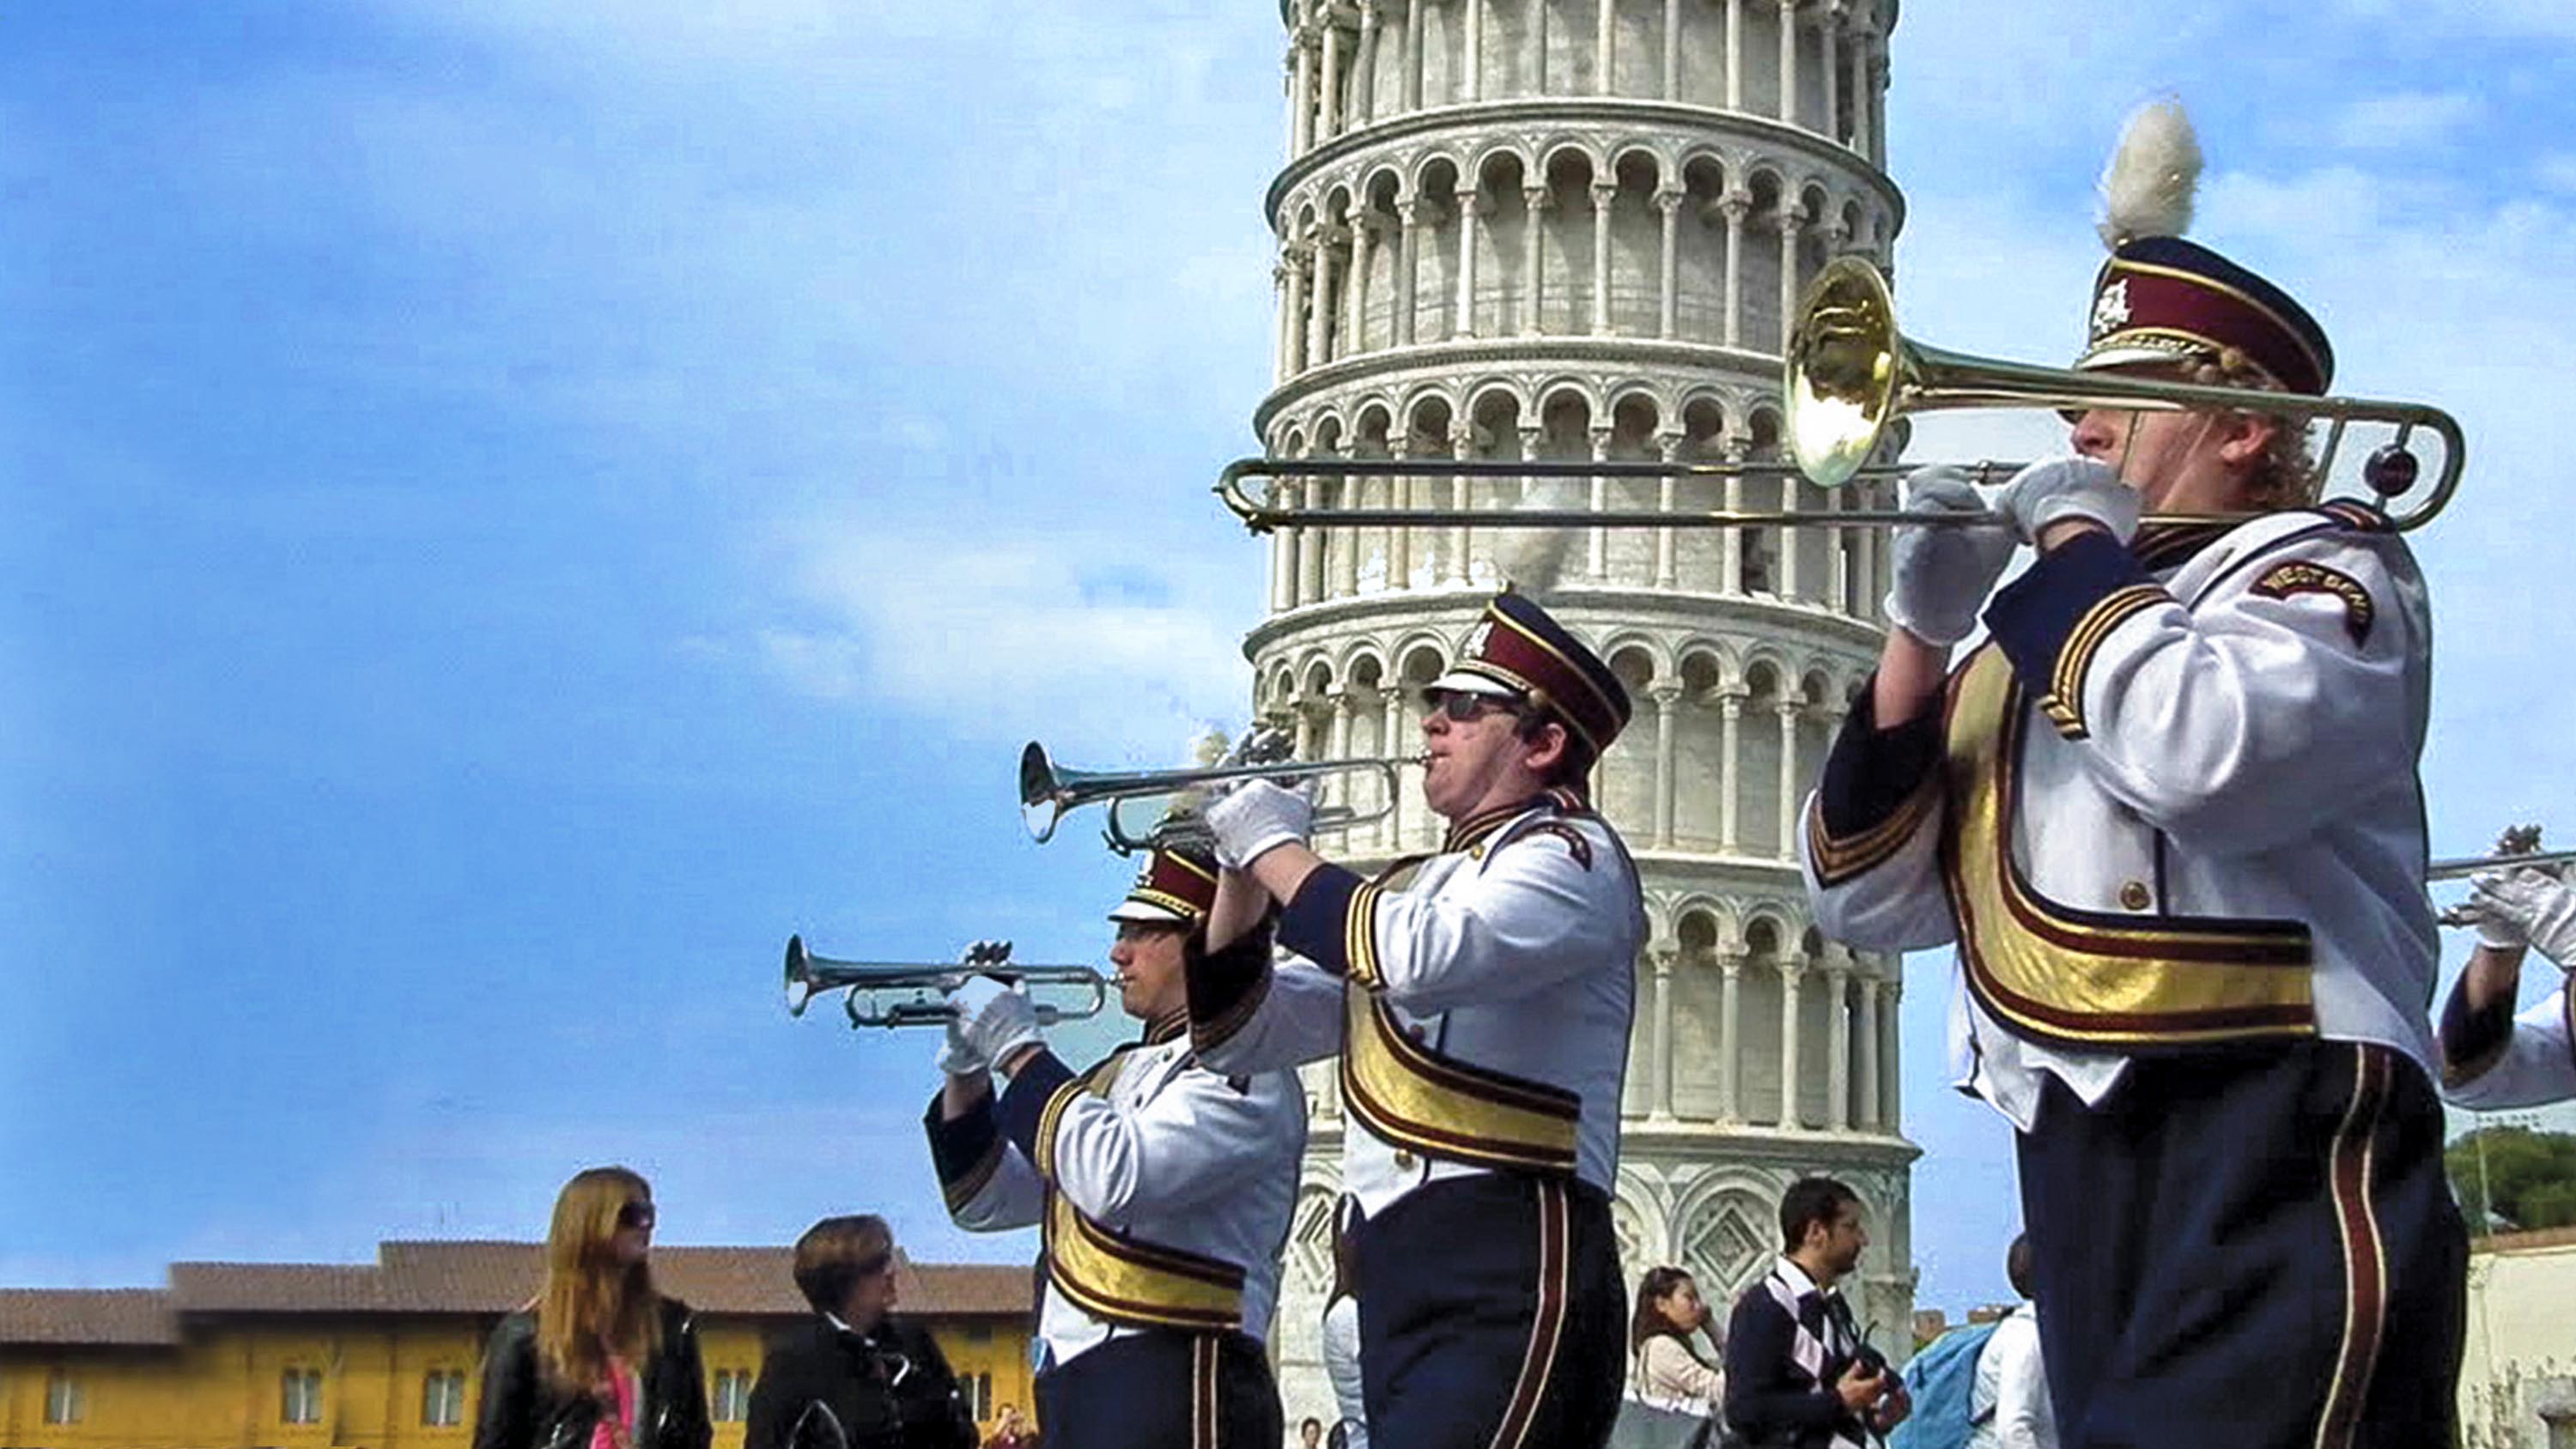 Band marching at Leaning tower of Pisa